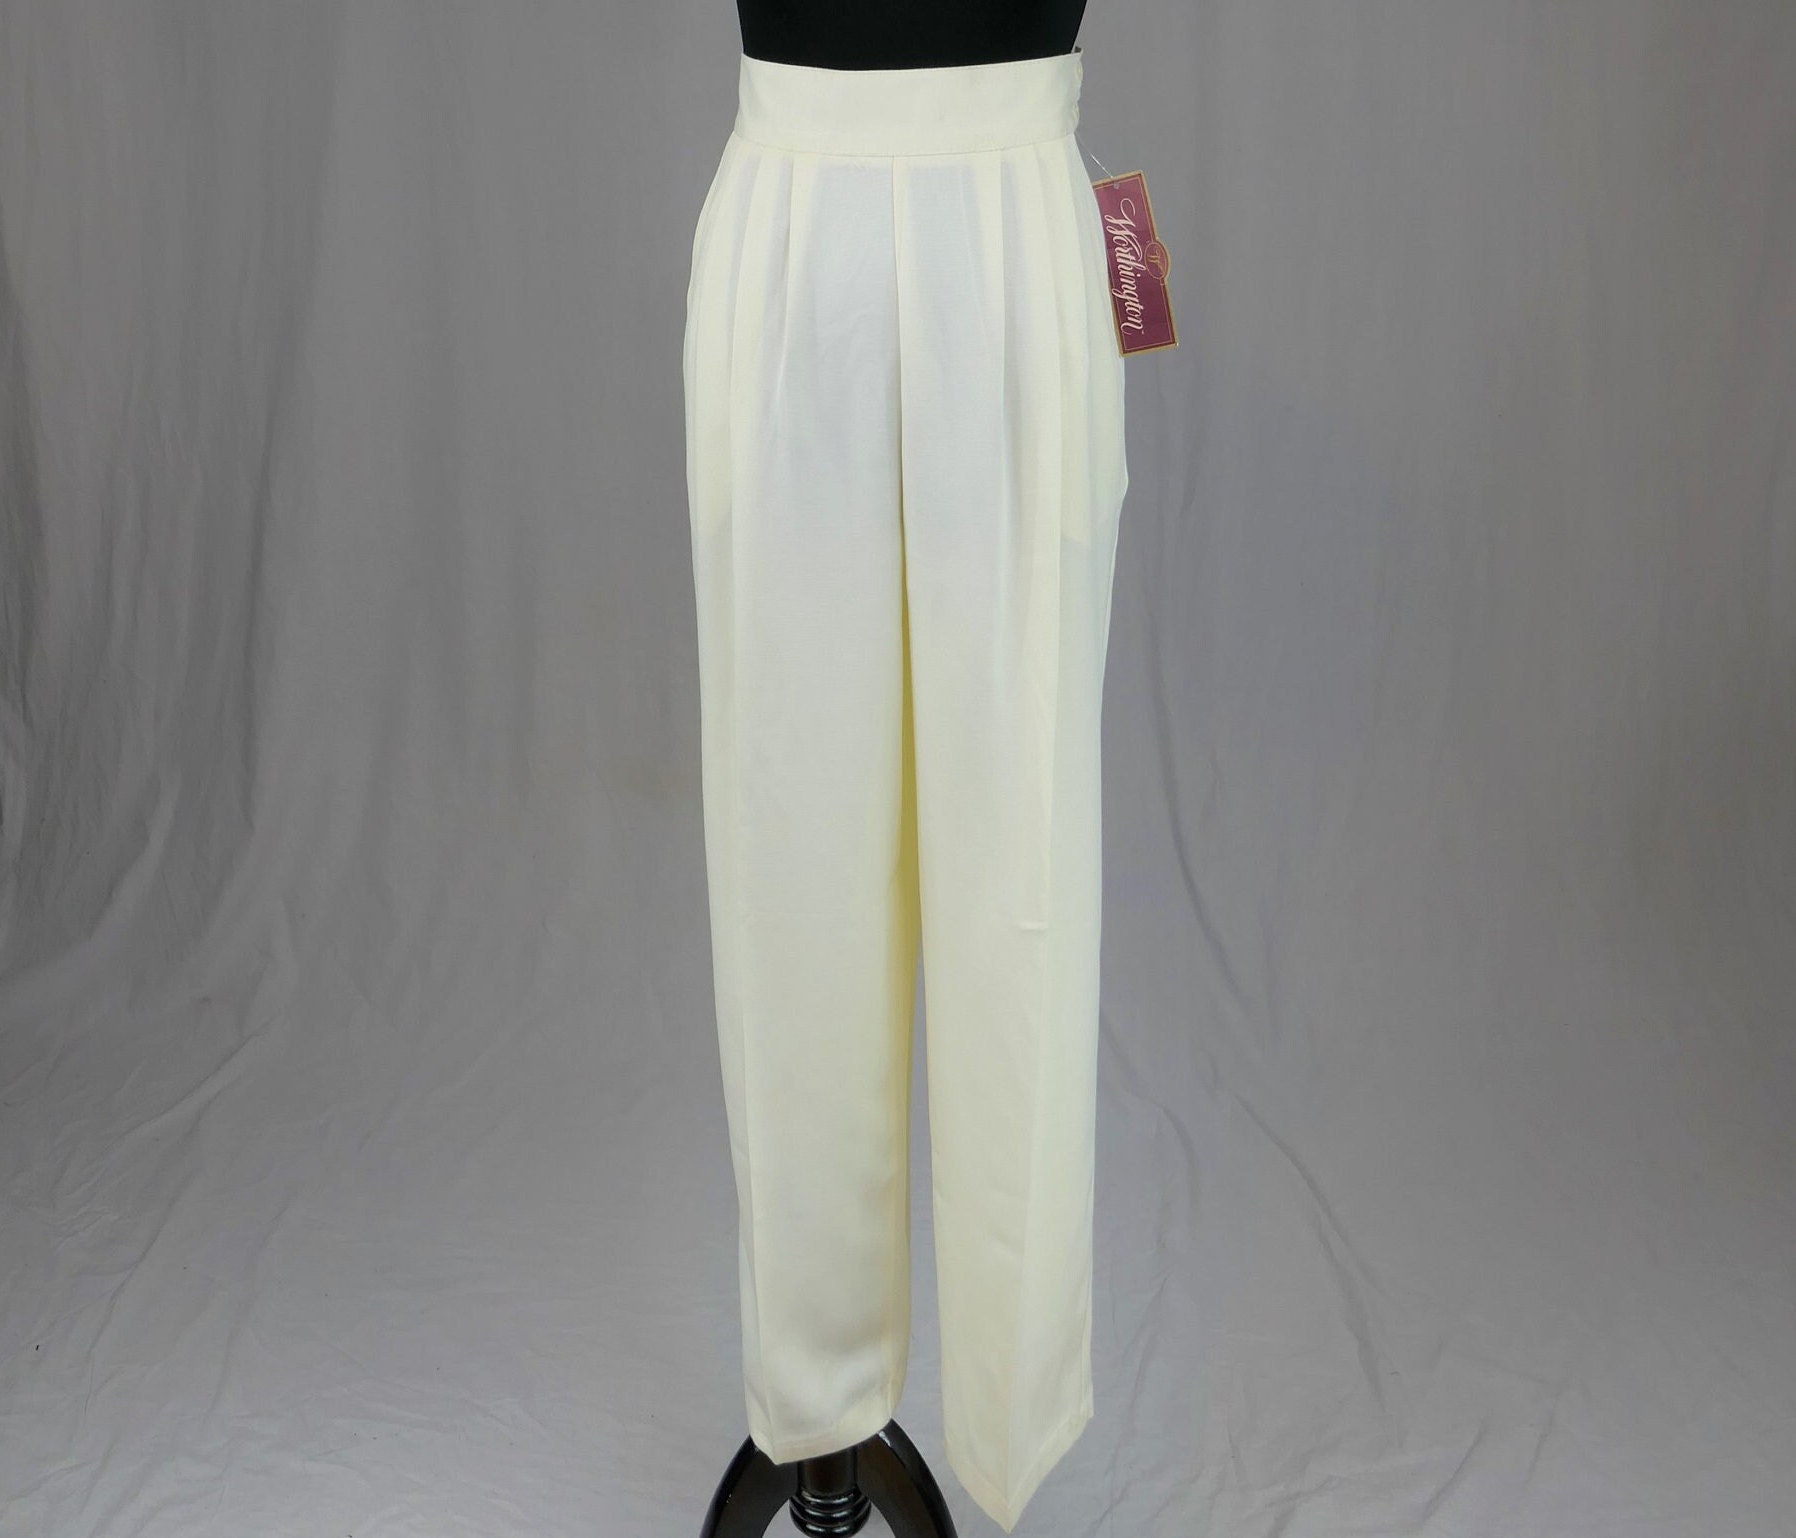 90s NWT Cream or Pale Yellow Pants Deadstock 30 to 34 Waist Pleated High Waist  Worthington Vintage 1990s Trousers L XL 